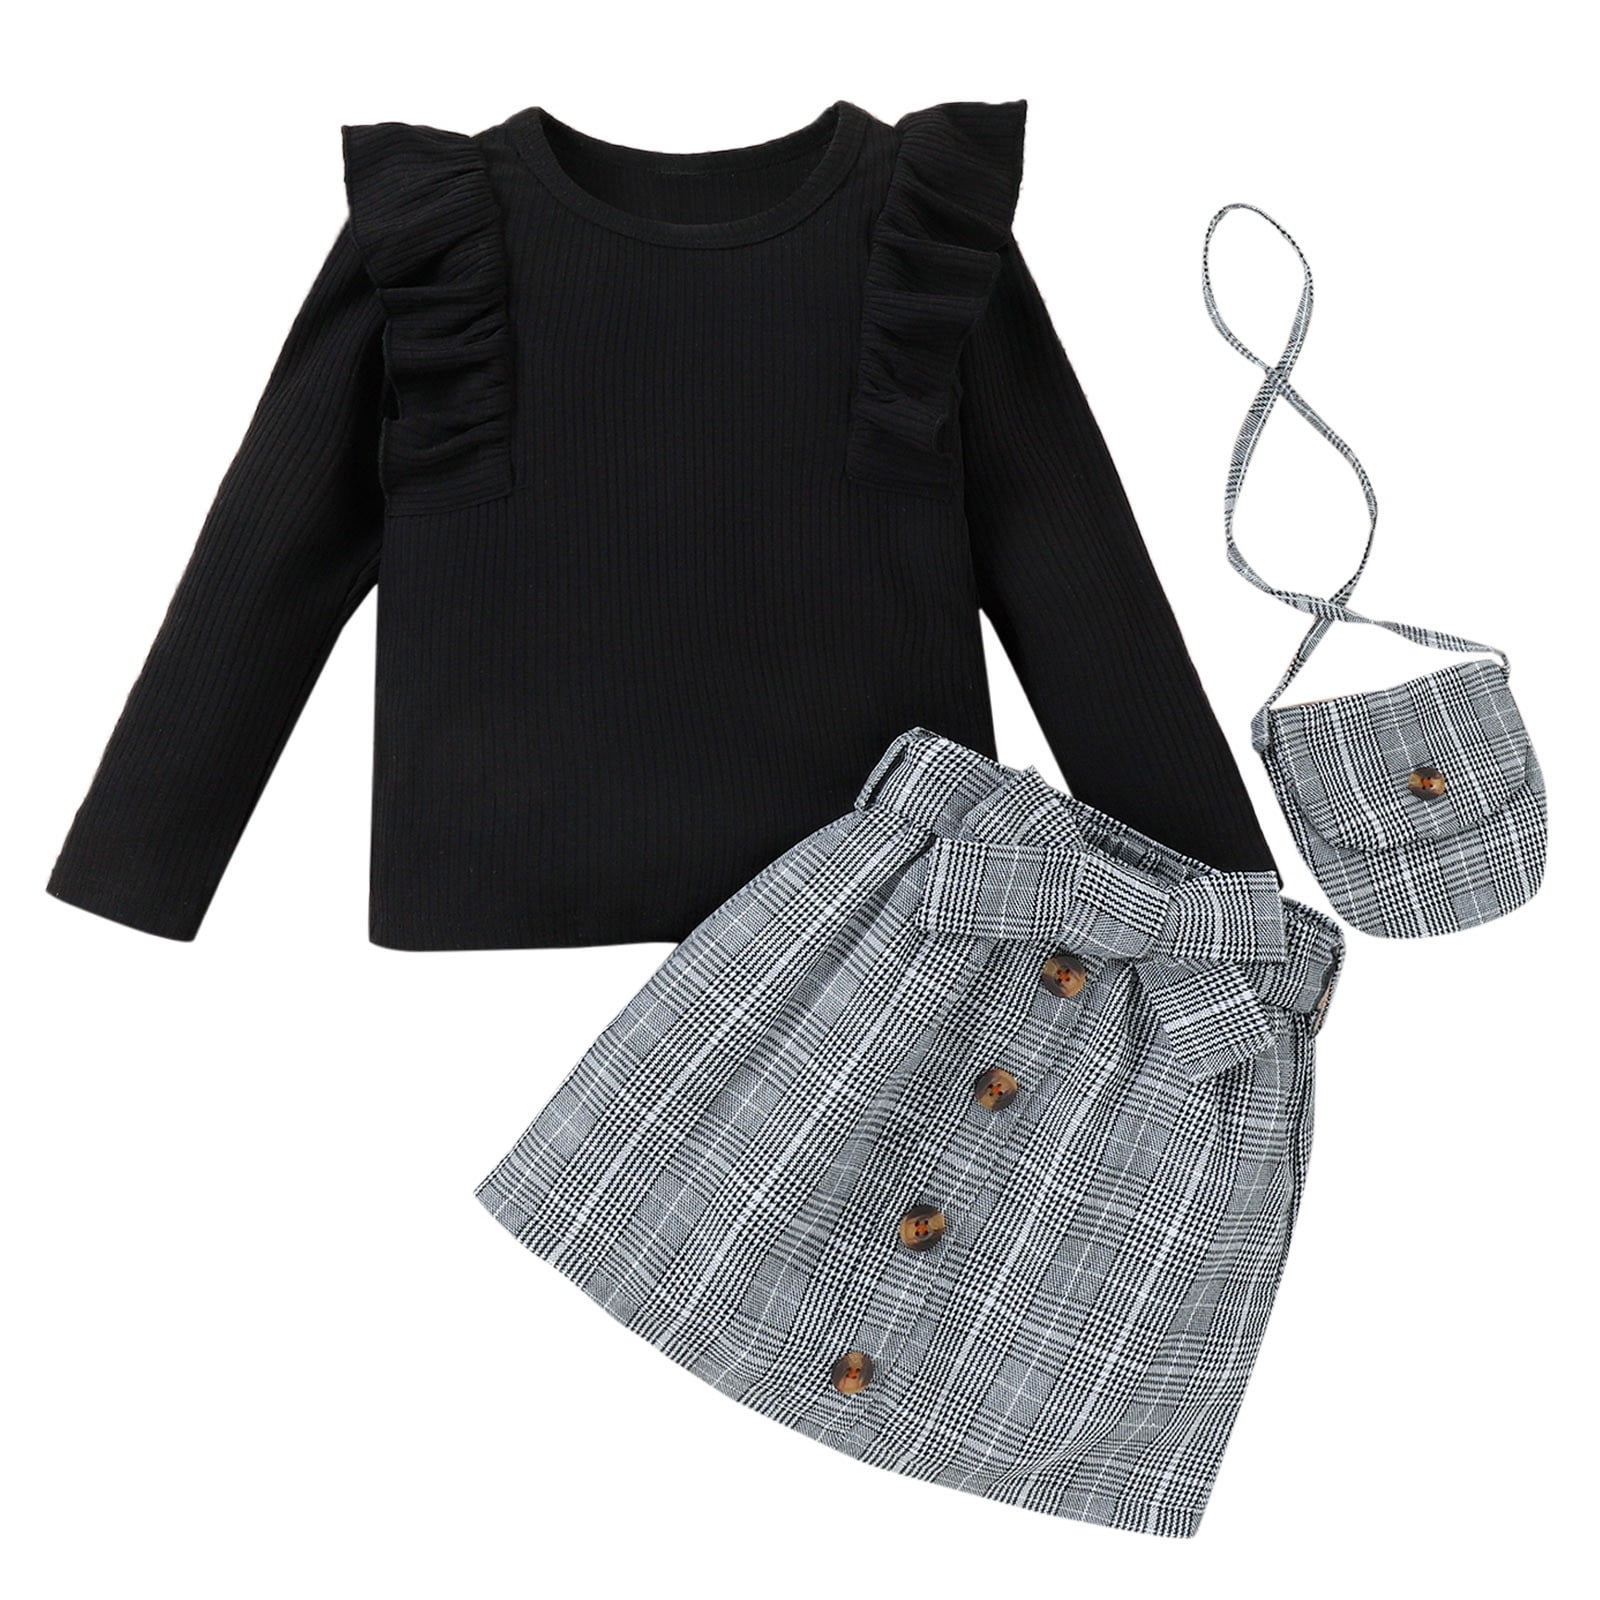 JDEFEG Little Girl Clothes Size 6 Toddler Girls Ruffles Long Sleeve Ribbed  Tops Plaid Prints Skirts Bag Outfits Cute Teen Girls Cotton Blend Black 5Y  